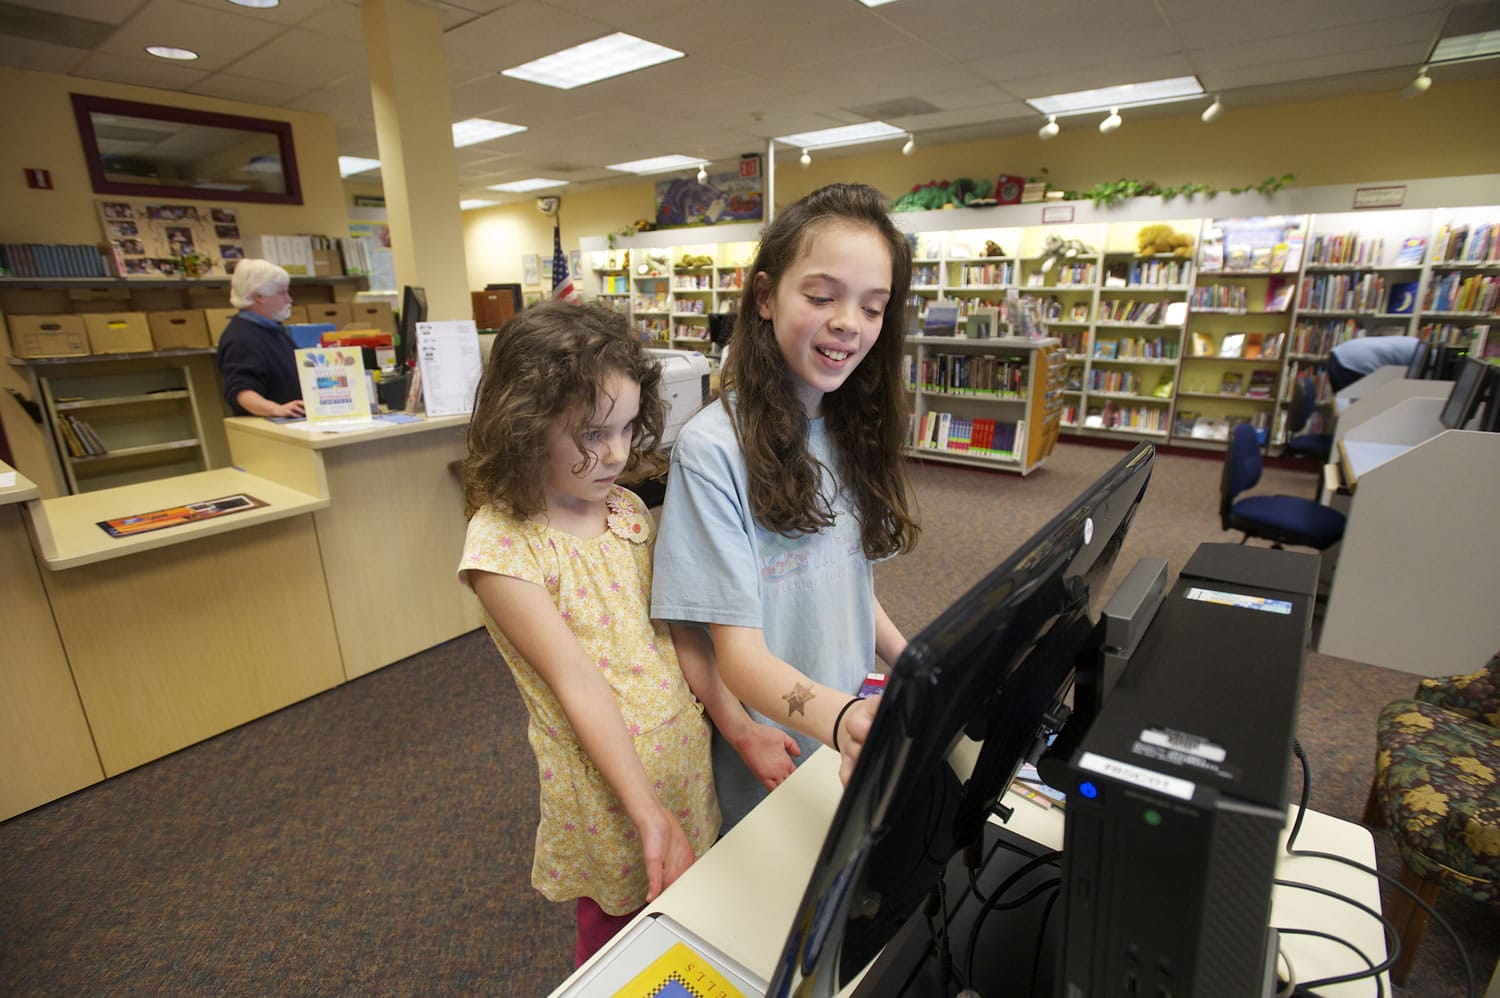 Aviela Olson, 5, left, and her sister Madeleine Olson, 10, check out books at the Ridgefield library on March 14.